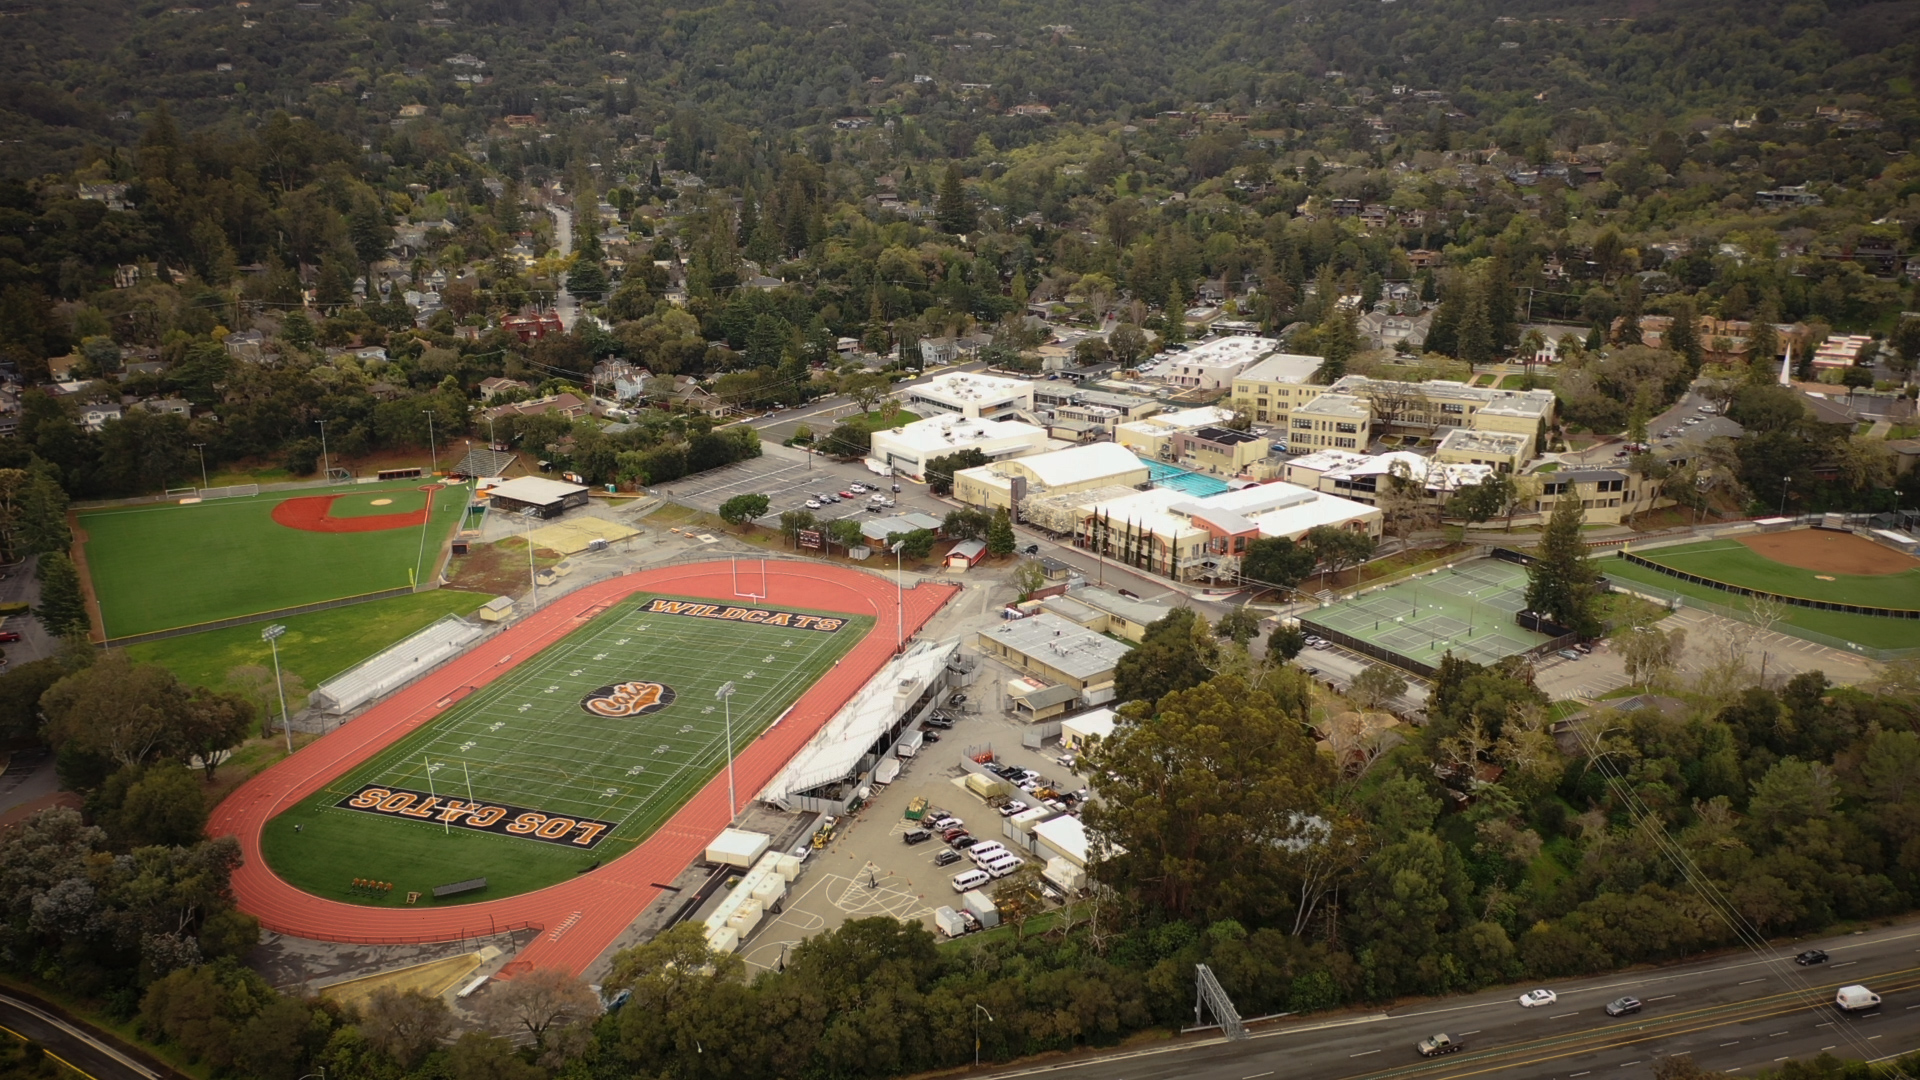 #MeTooLGHS: Investigating Sex Assault Accusations by Los Gatos High Students